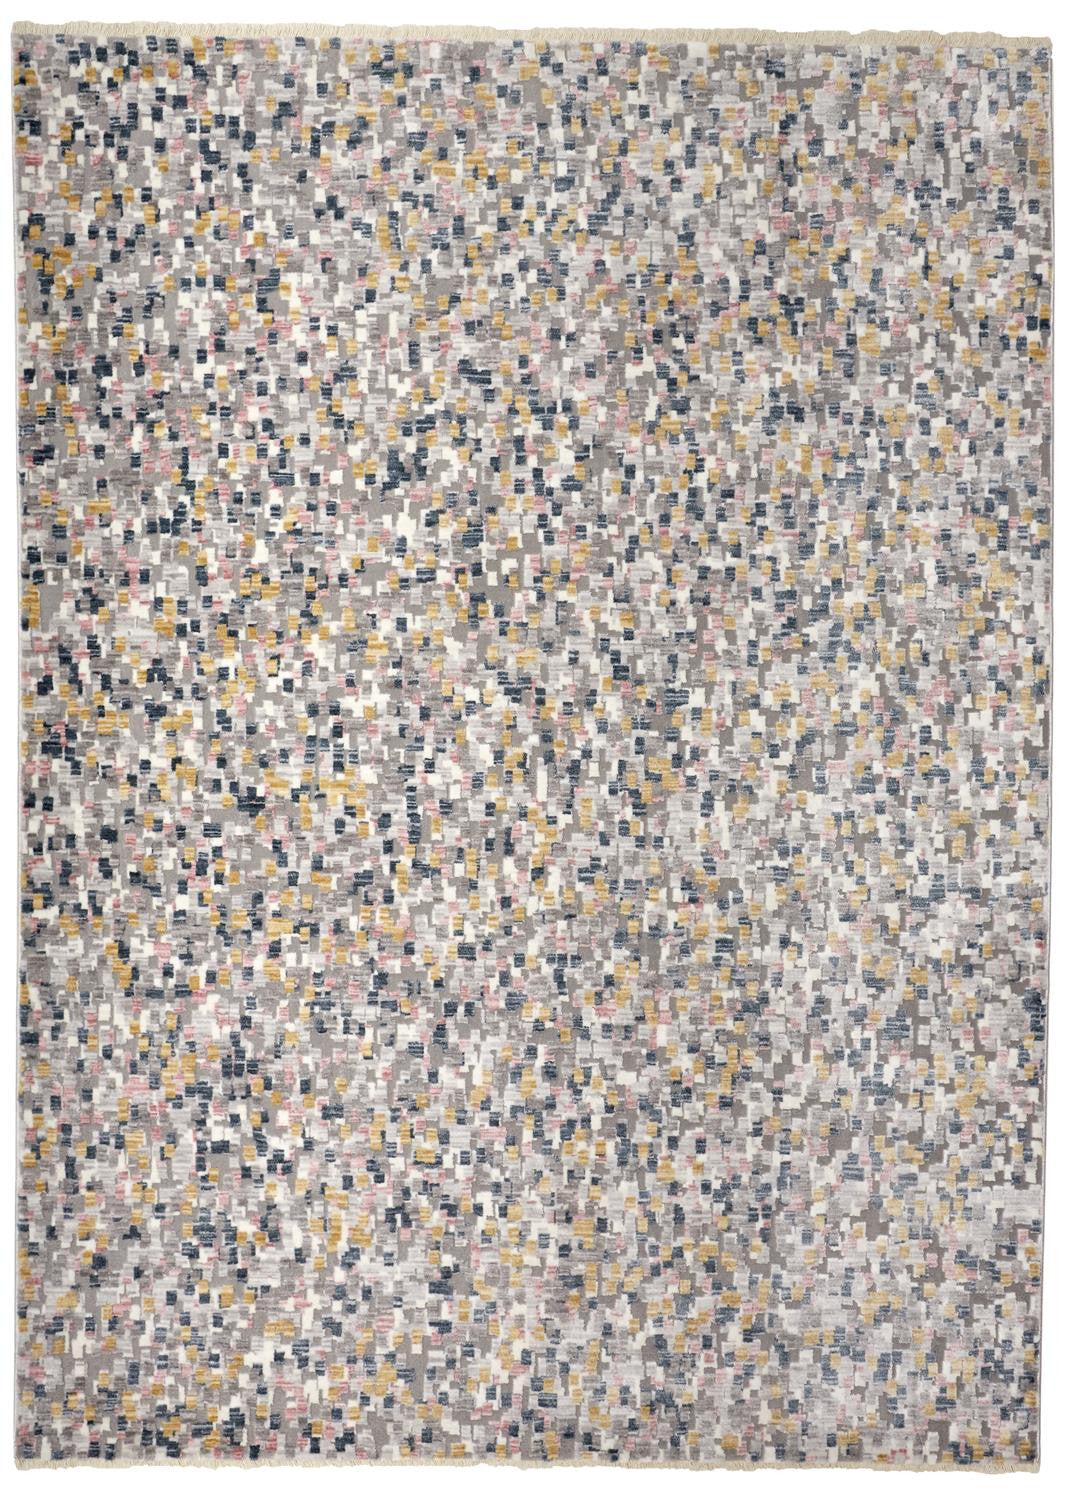 6' Taupe Tan And Orange Round Abstract Stain Resistant Area Rug